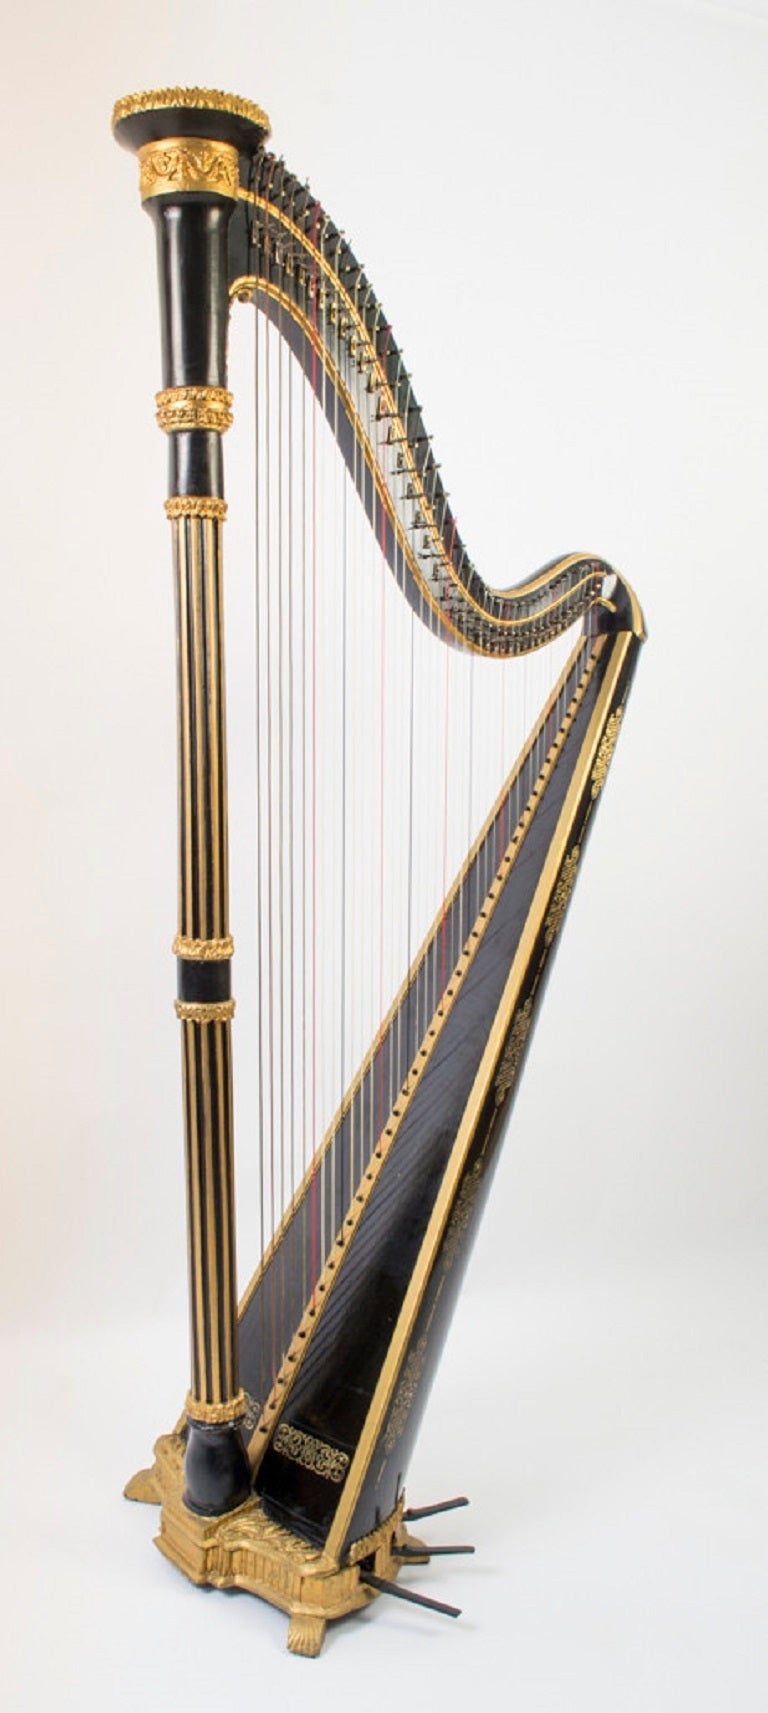 This is a stunning, French antique, ebonised parcel gilt harp, with brass inlay, circa 1780 in date. 

This instrument is a single action hook harp, built Circa 1780 in Paris France. It uses the pedal-system Hochbrucker in Austria had invented to